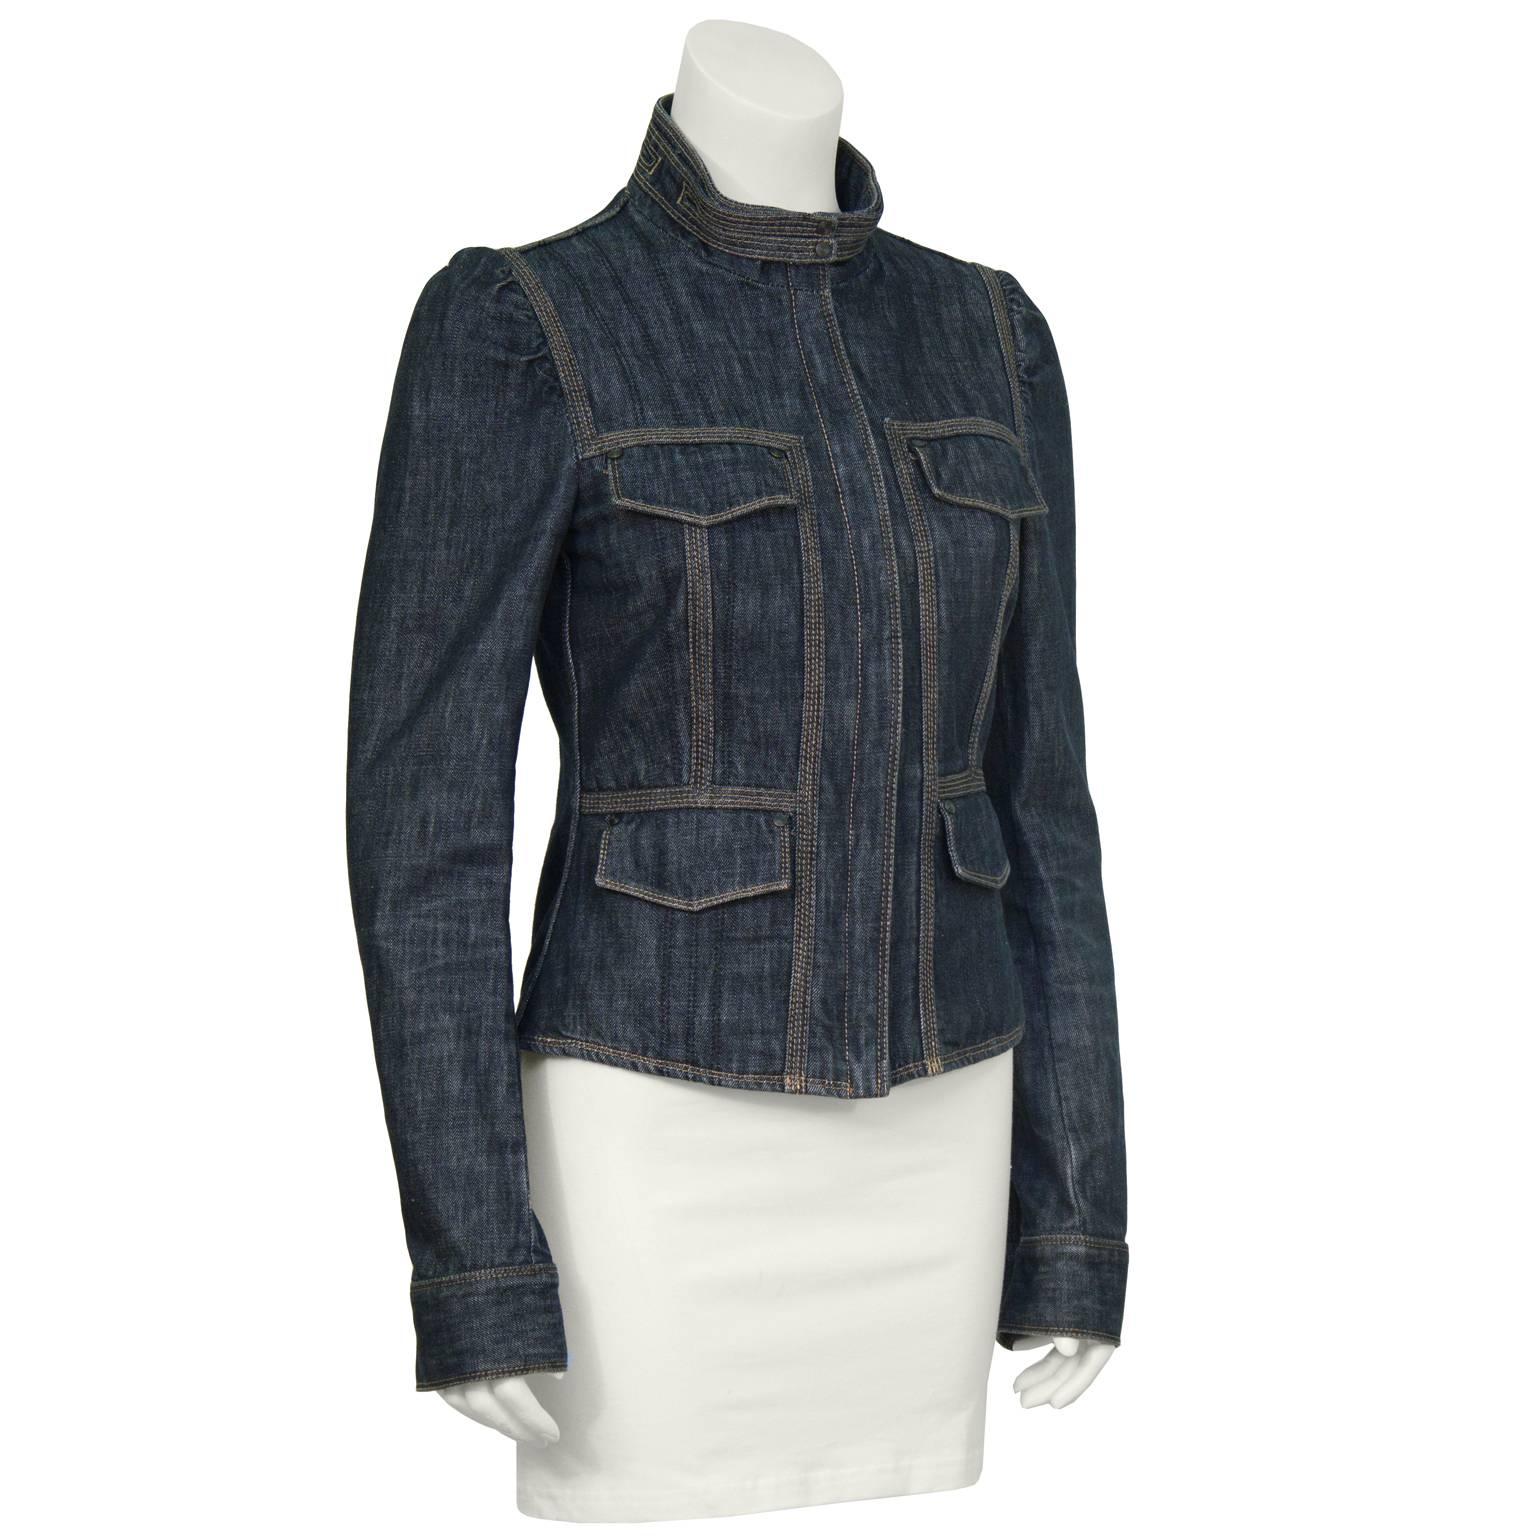 2002 Gucci from Tom Ford era dark denim jacket. The jacket features a high collar with two snap buckles, a zip front and slightly puffed shoulders. The cuffs close with zipper and double snap closure, four top flap pockets on the front. Seams down